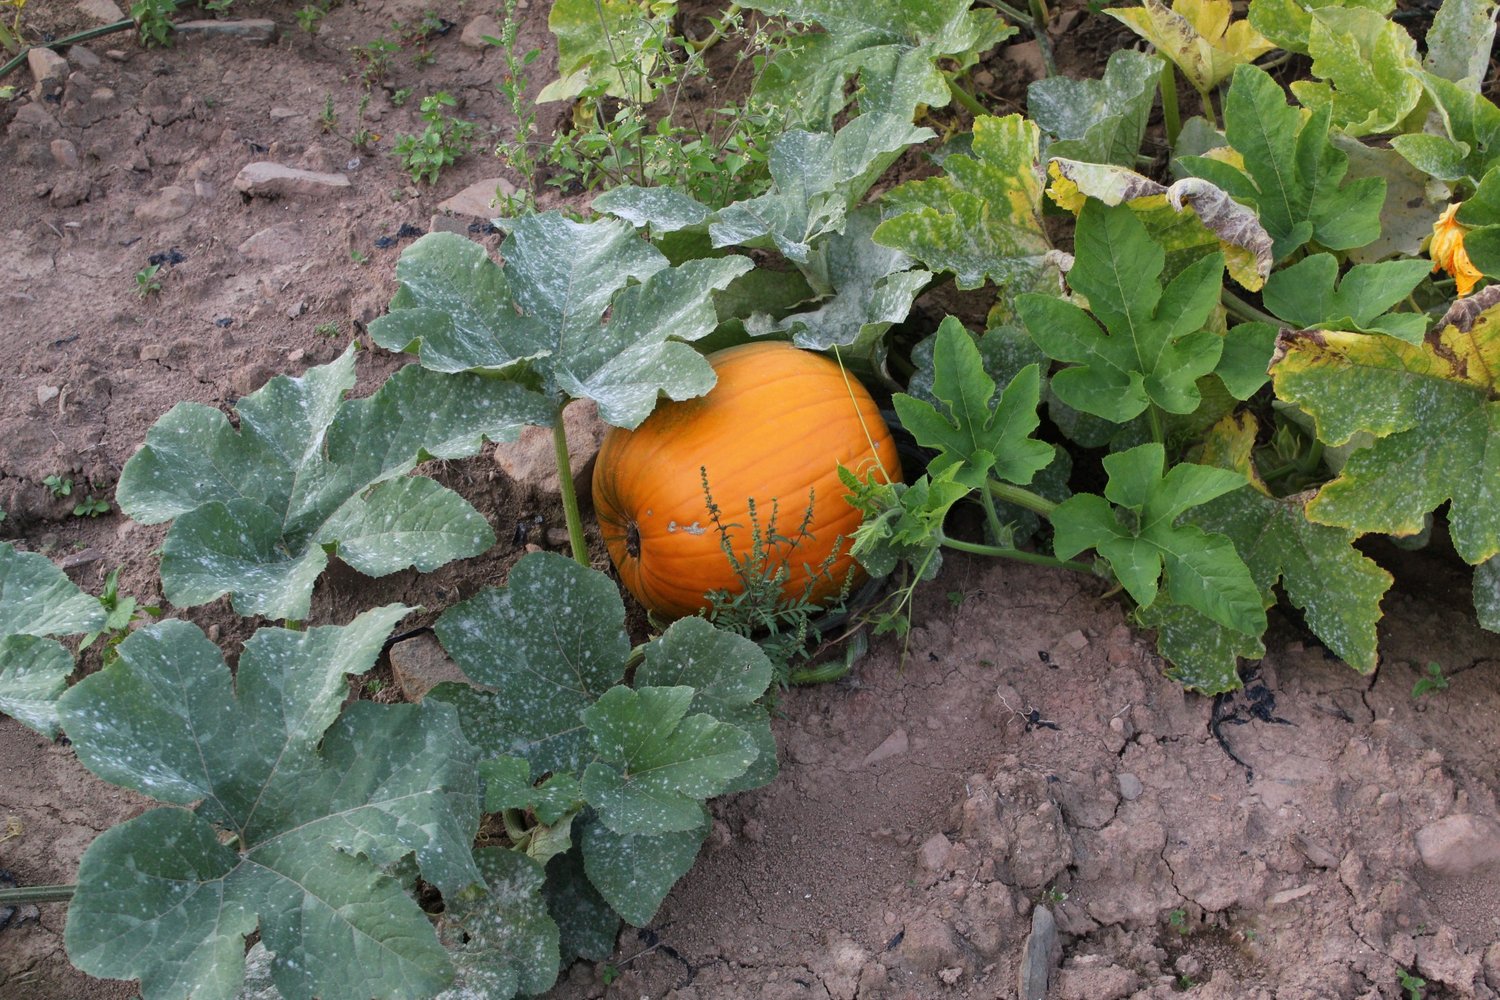 Large pumpkins almost ready for harvest in the field.